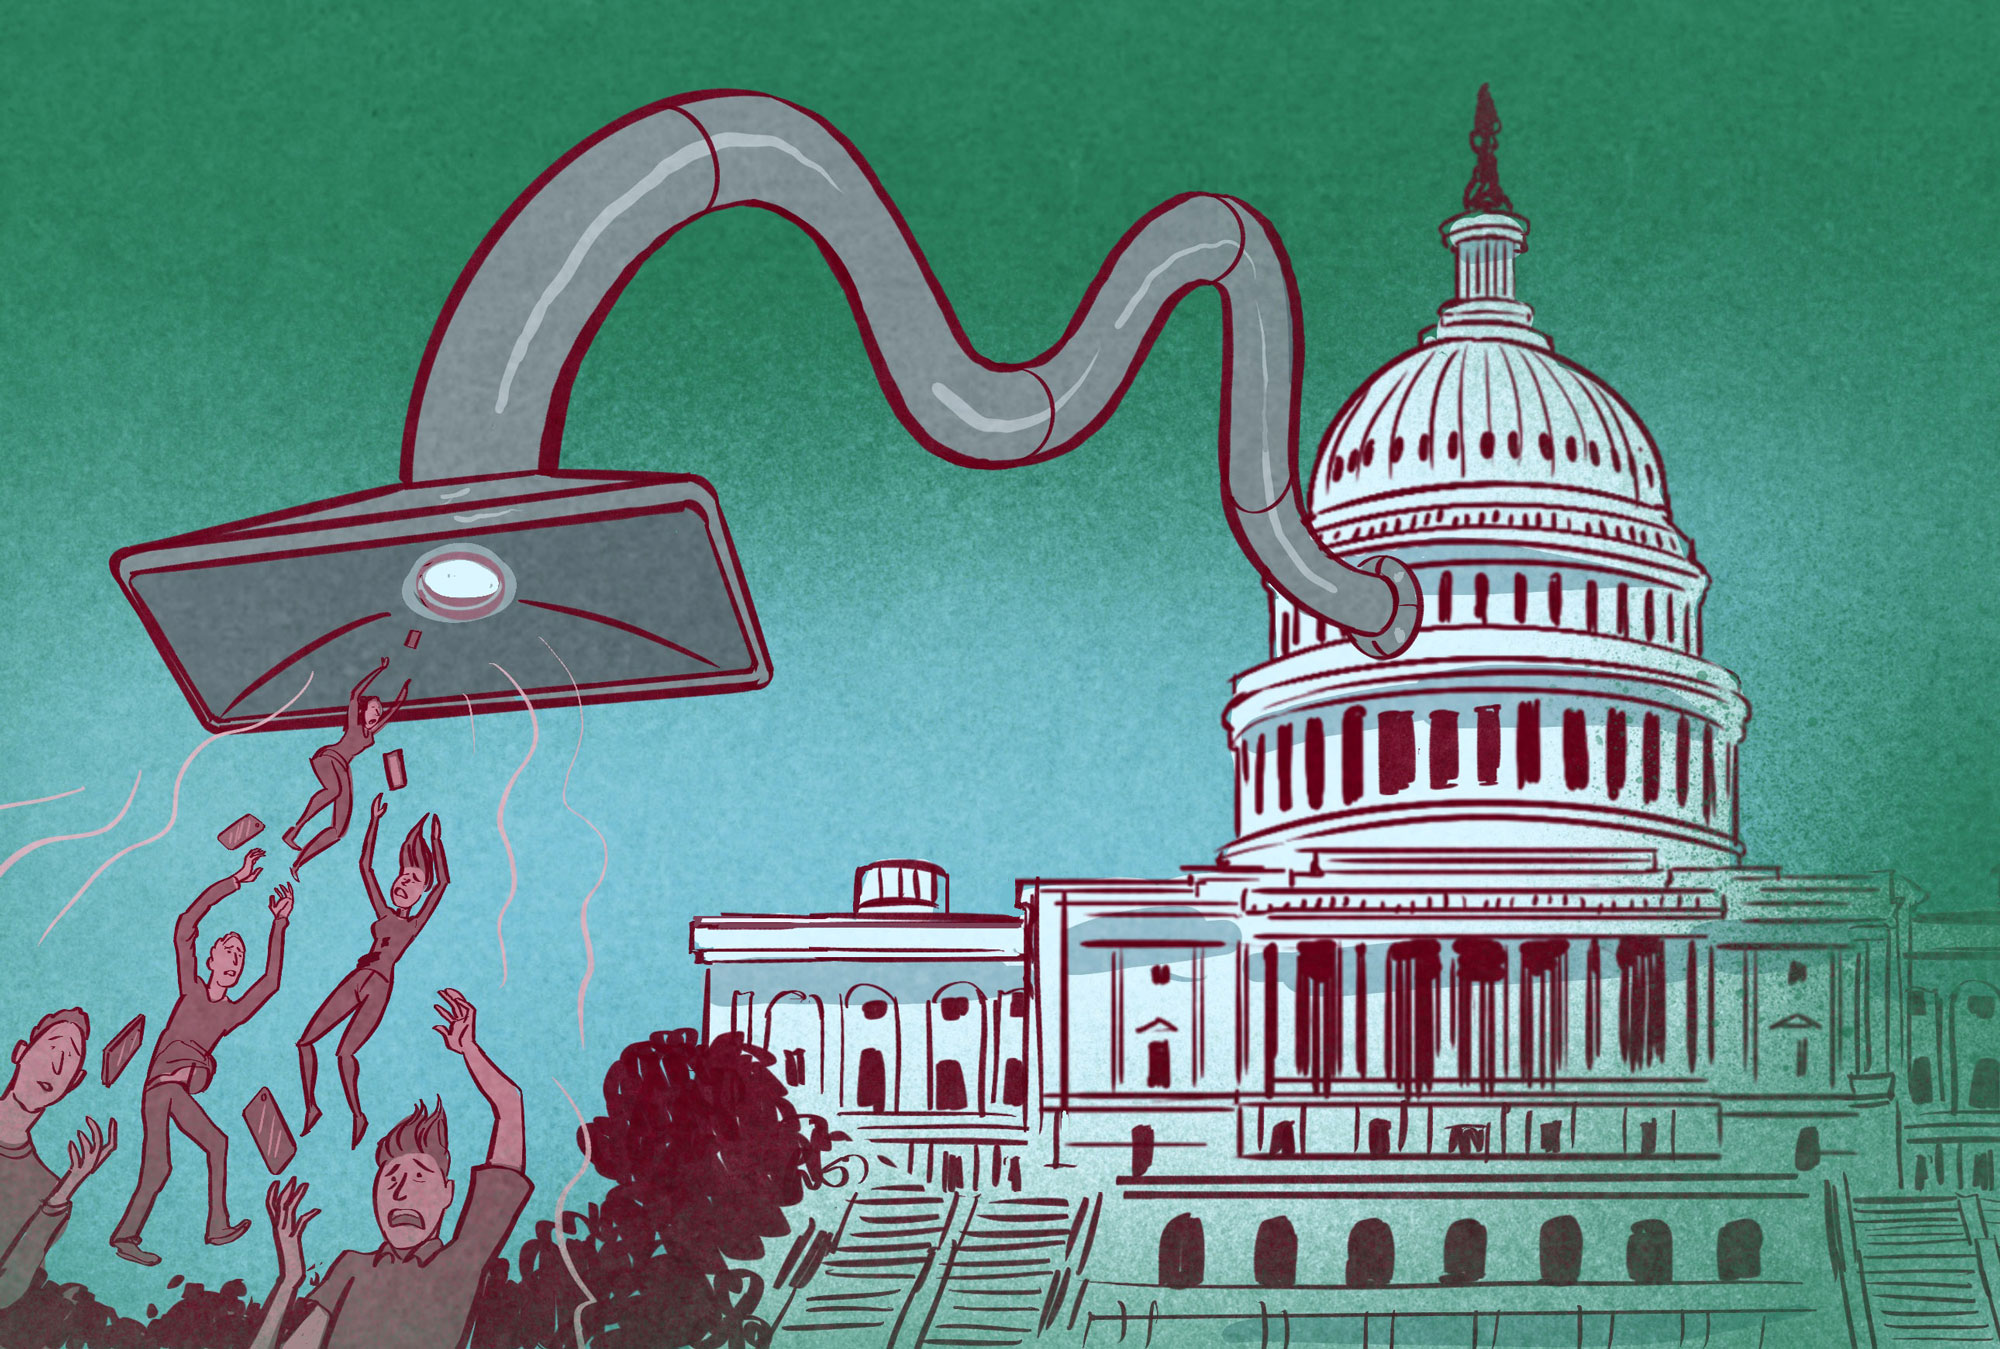 Yes, the Patriot Act amendment to track us online is real